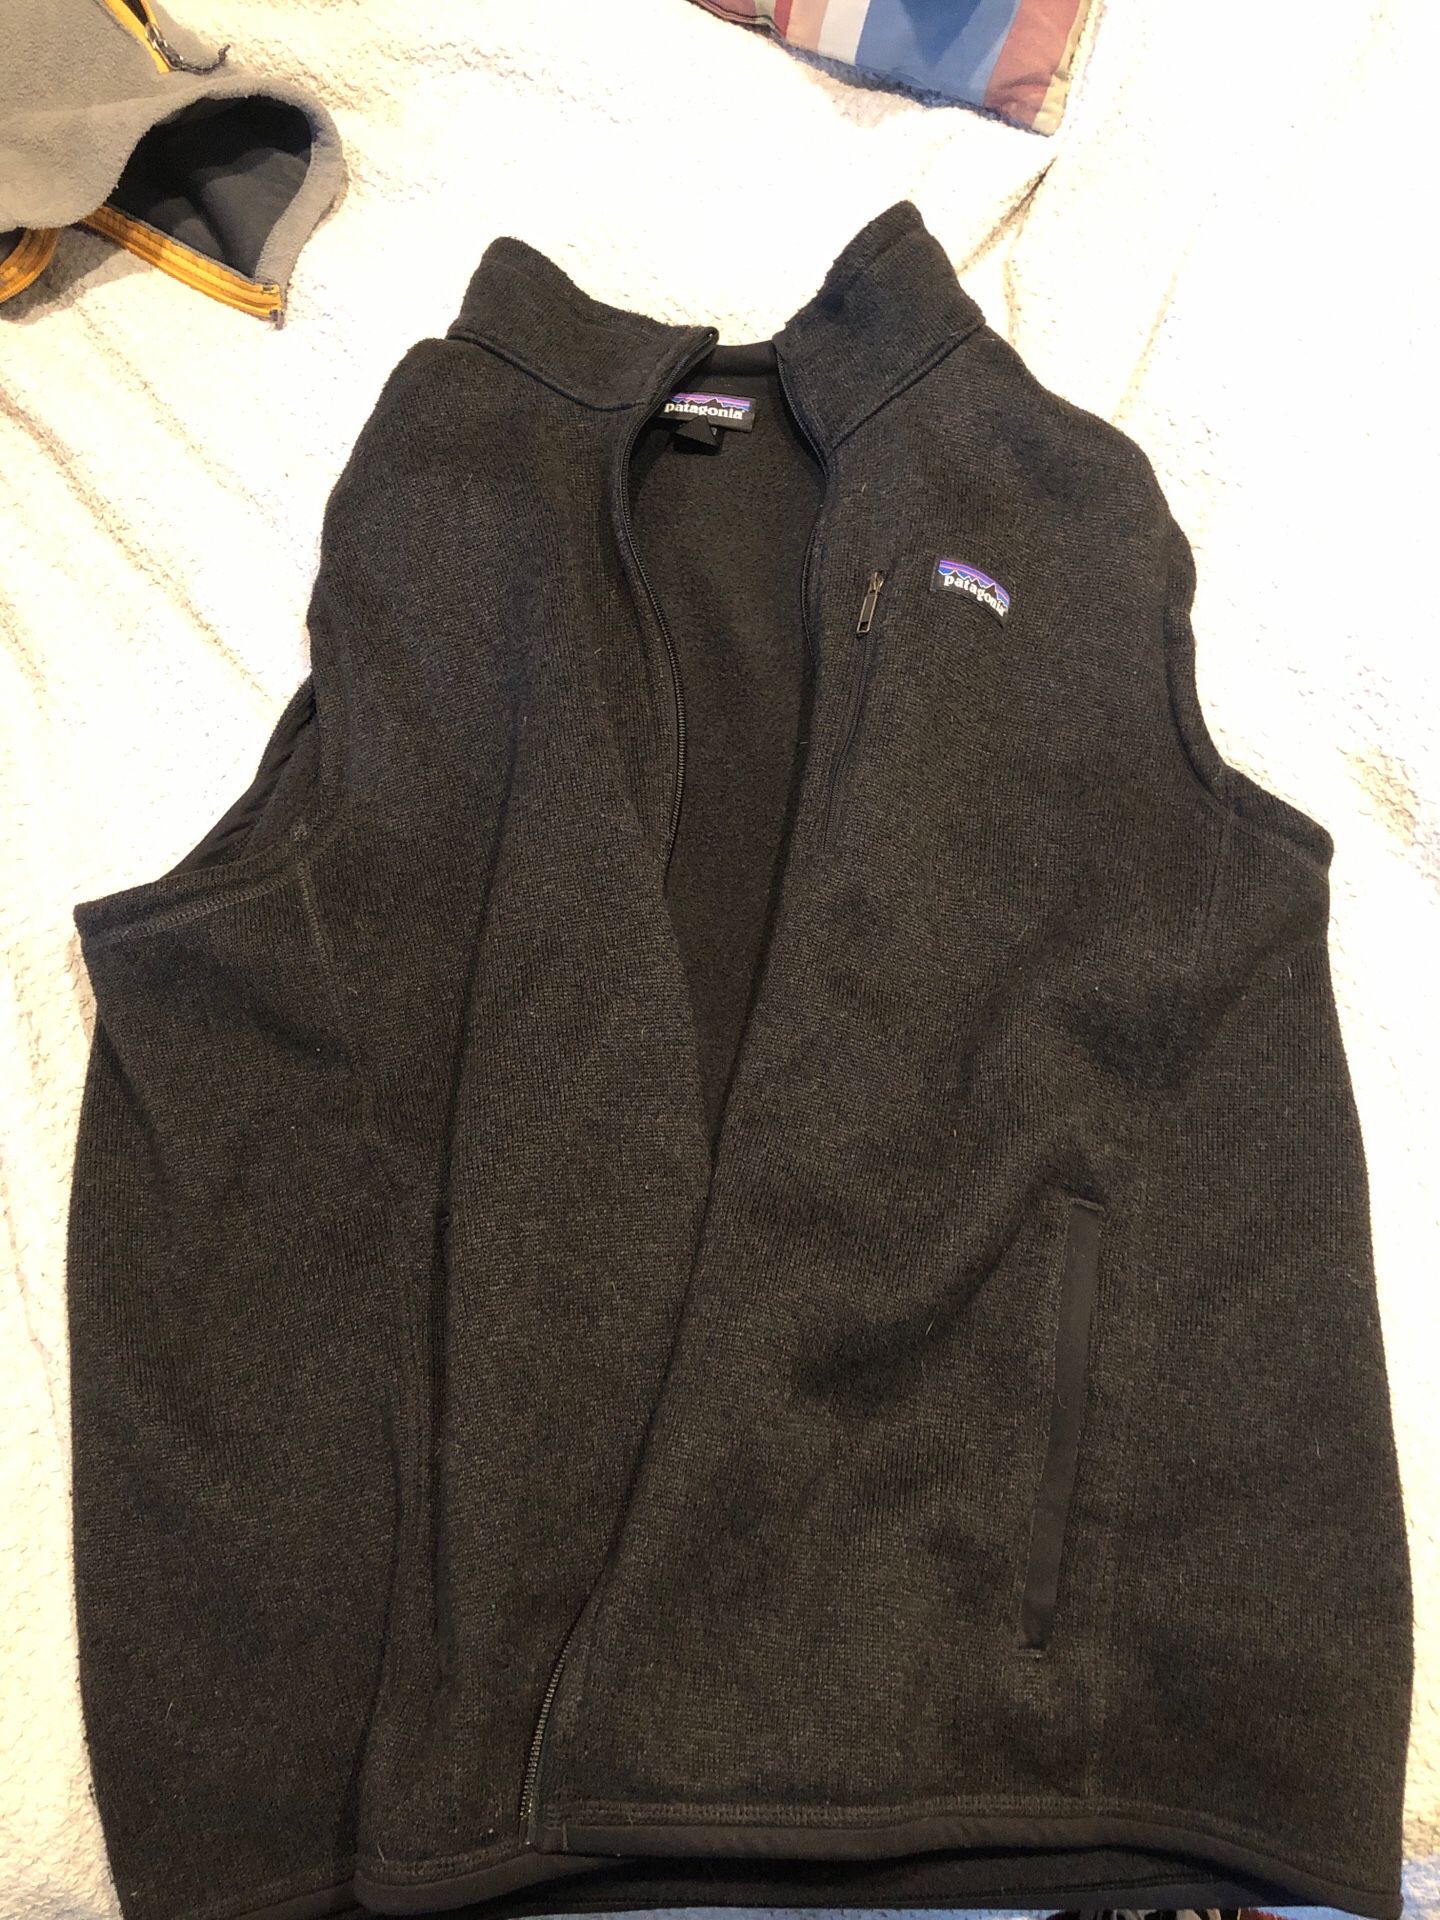 Patagonia/TNF/Eddie Bauer for sale